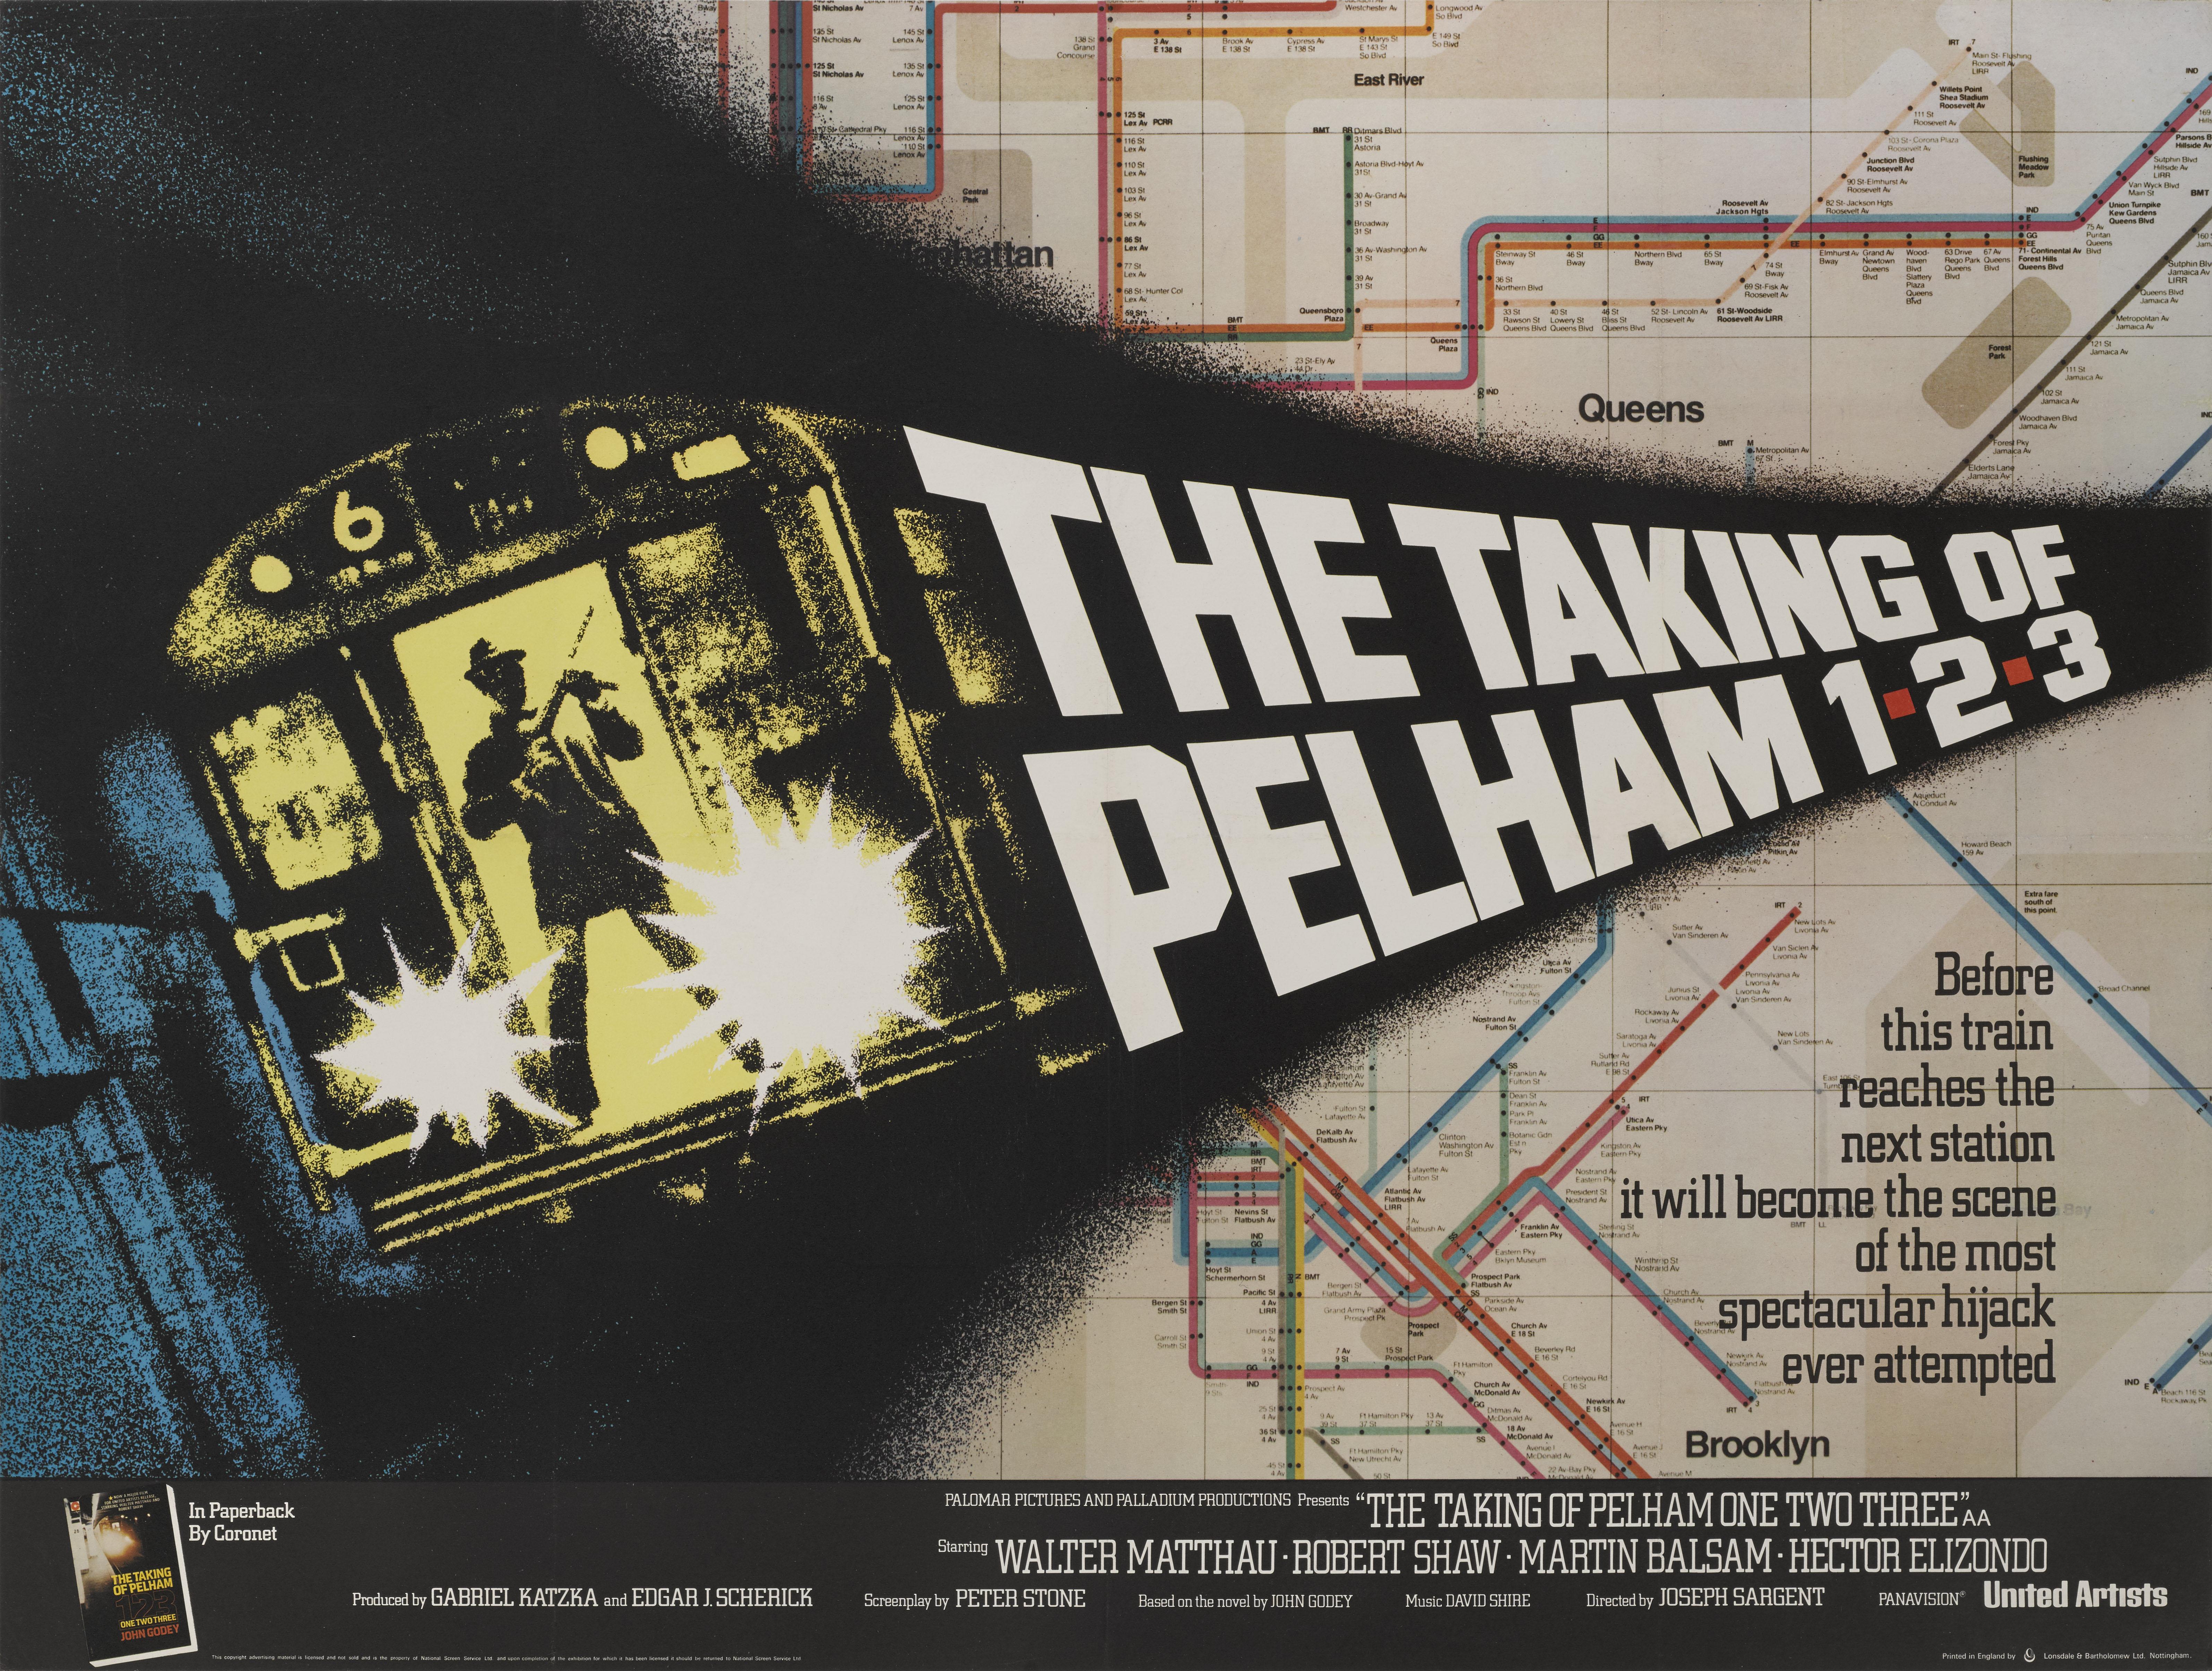 Original British film poster for the film “The Taking of Pelham One Two Three”, 1974.
This action thriller was directed by Joseph Sargent and stars Walter Matthau, Robert Shaw, Martin Balsam, and Héctor Elizondo. The film tells the story of a group